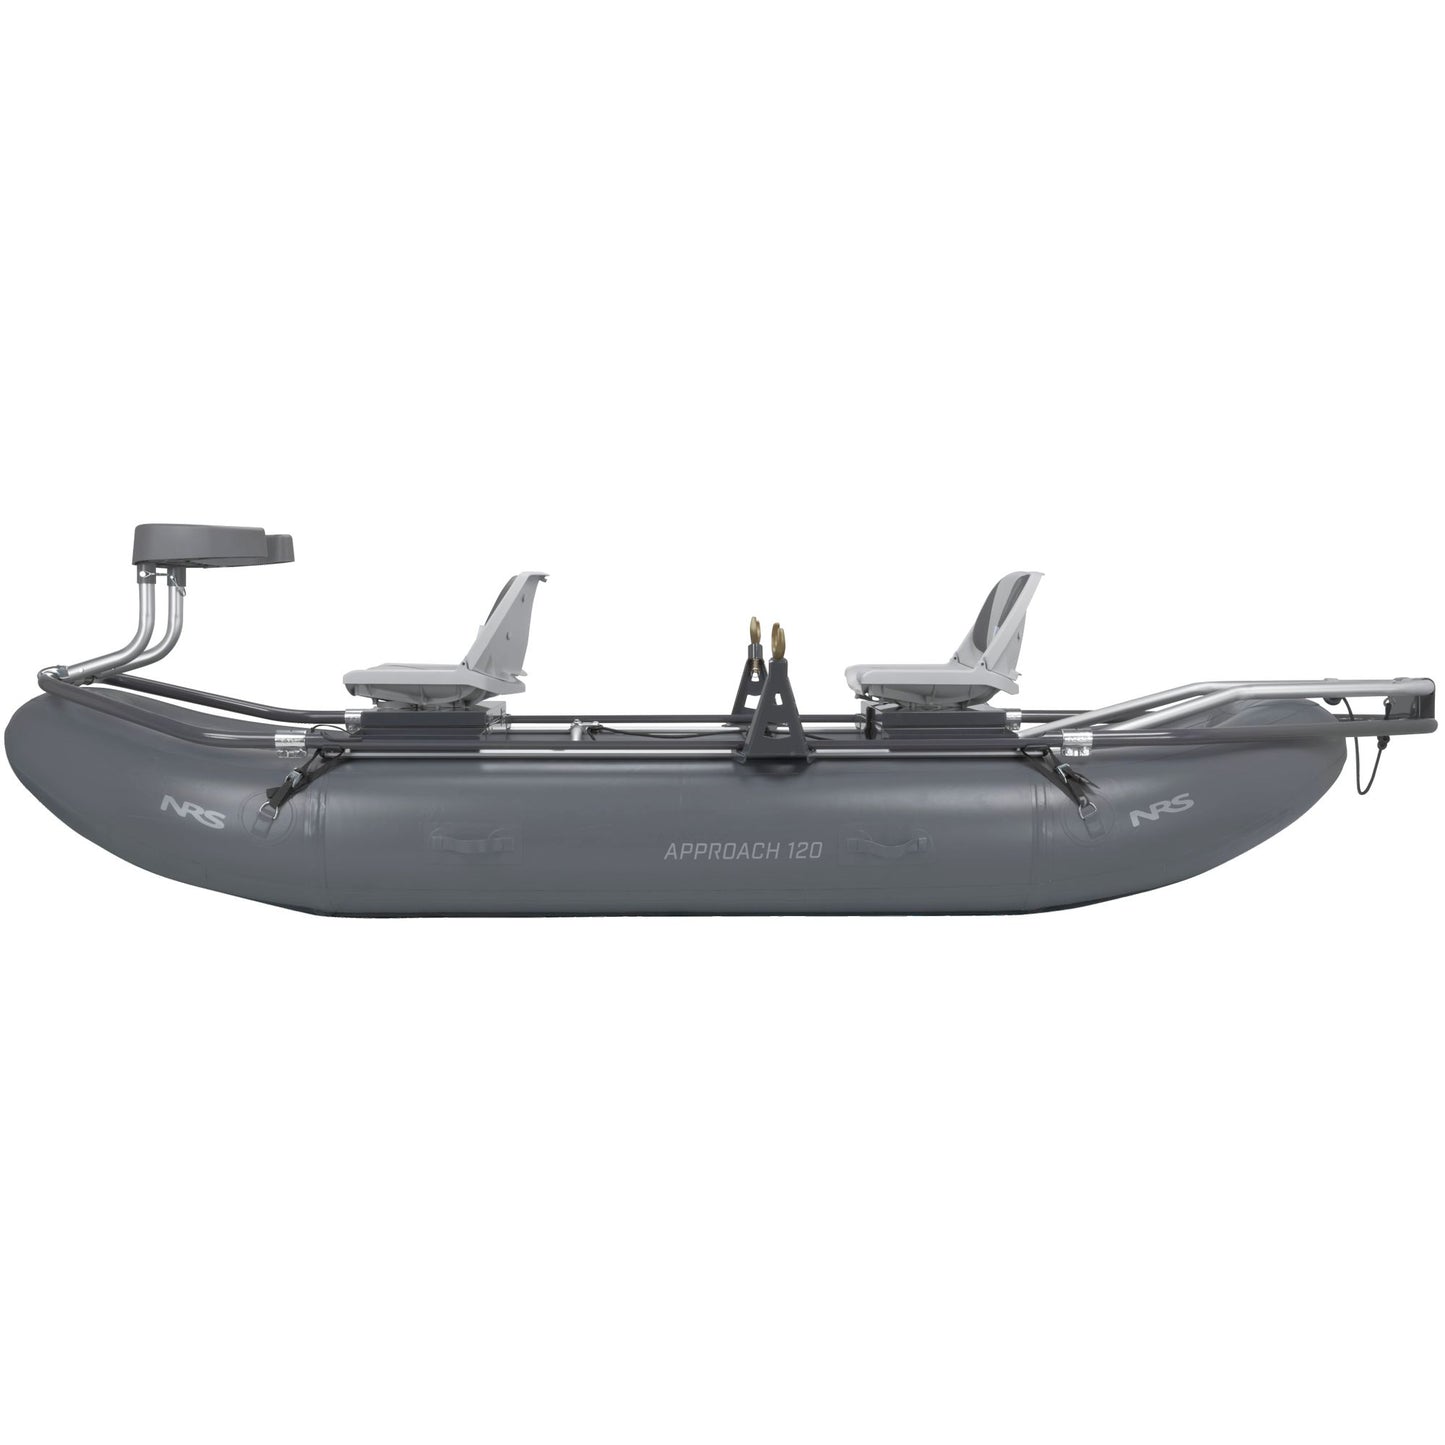 Inflatable lightweight NRS Approach Fishing Raft with mounted seats and accessories on a white background.